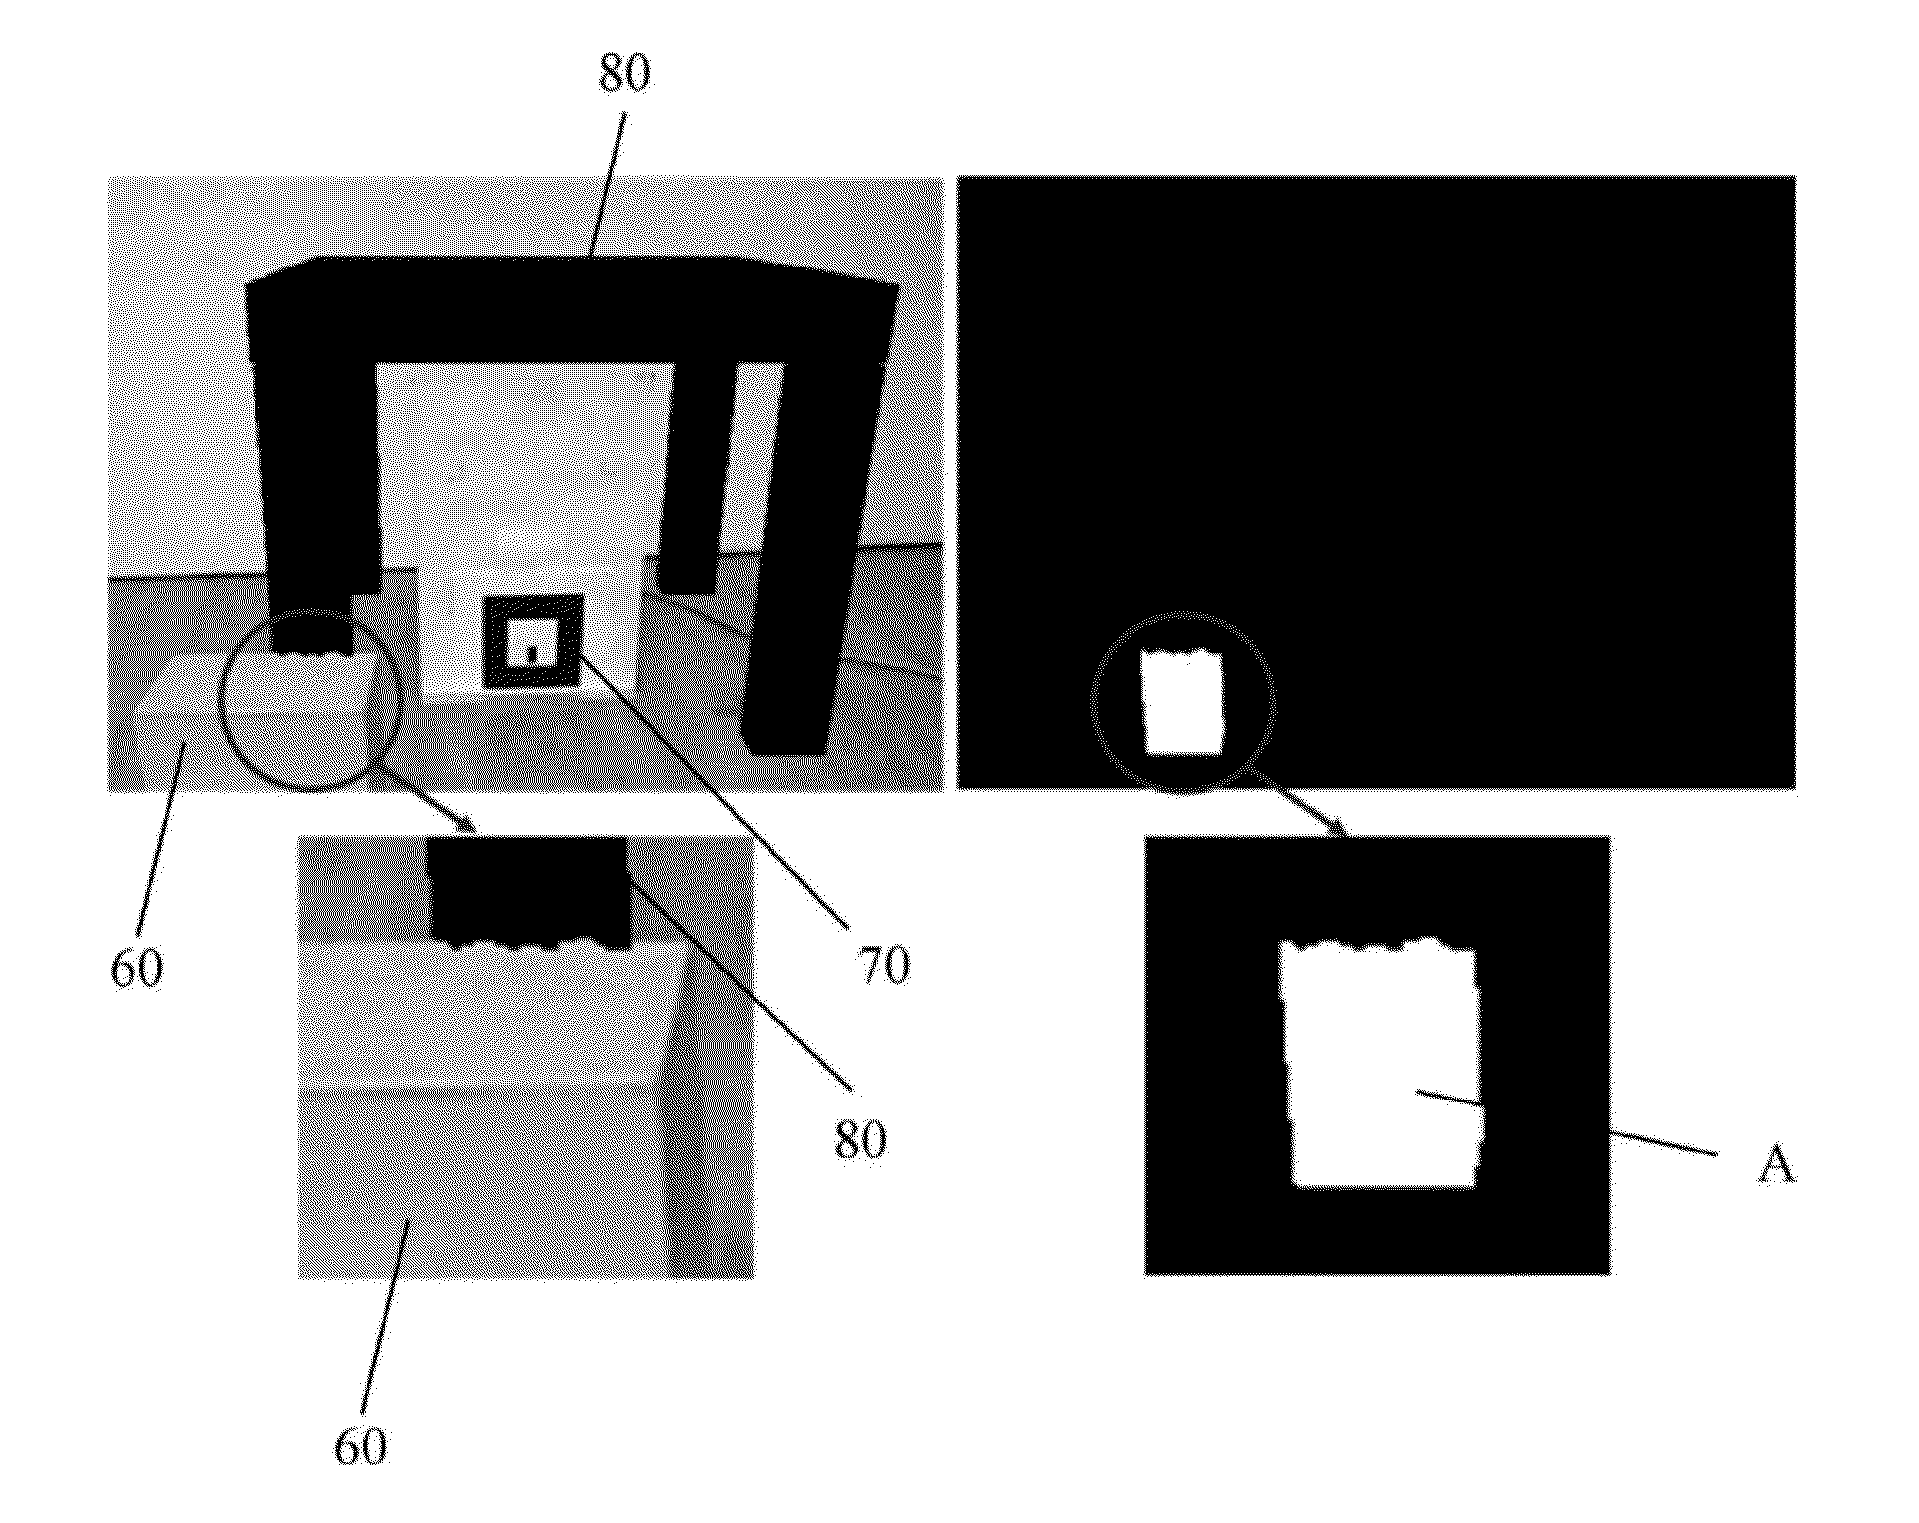 Method for Optimizing Occlusion in Augmented Reality Based On Depth Camera